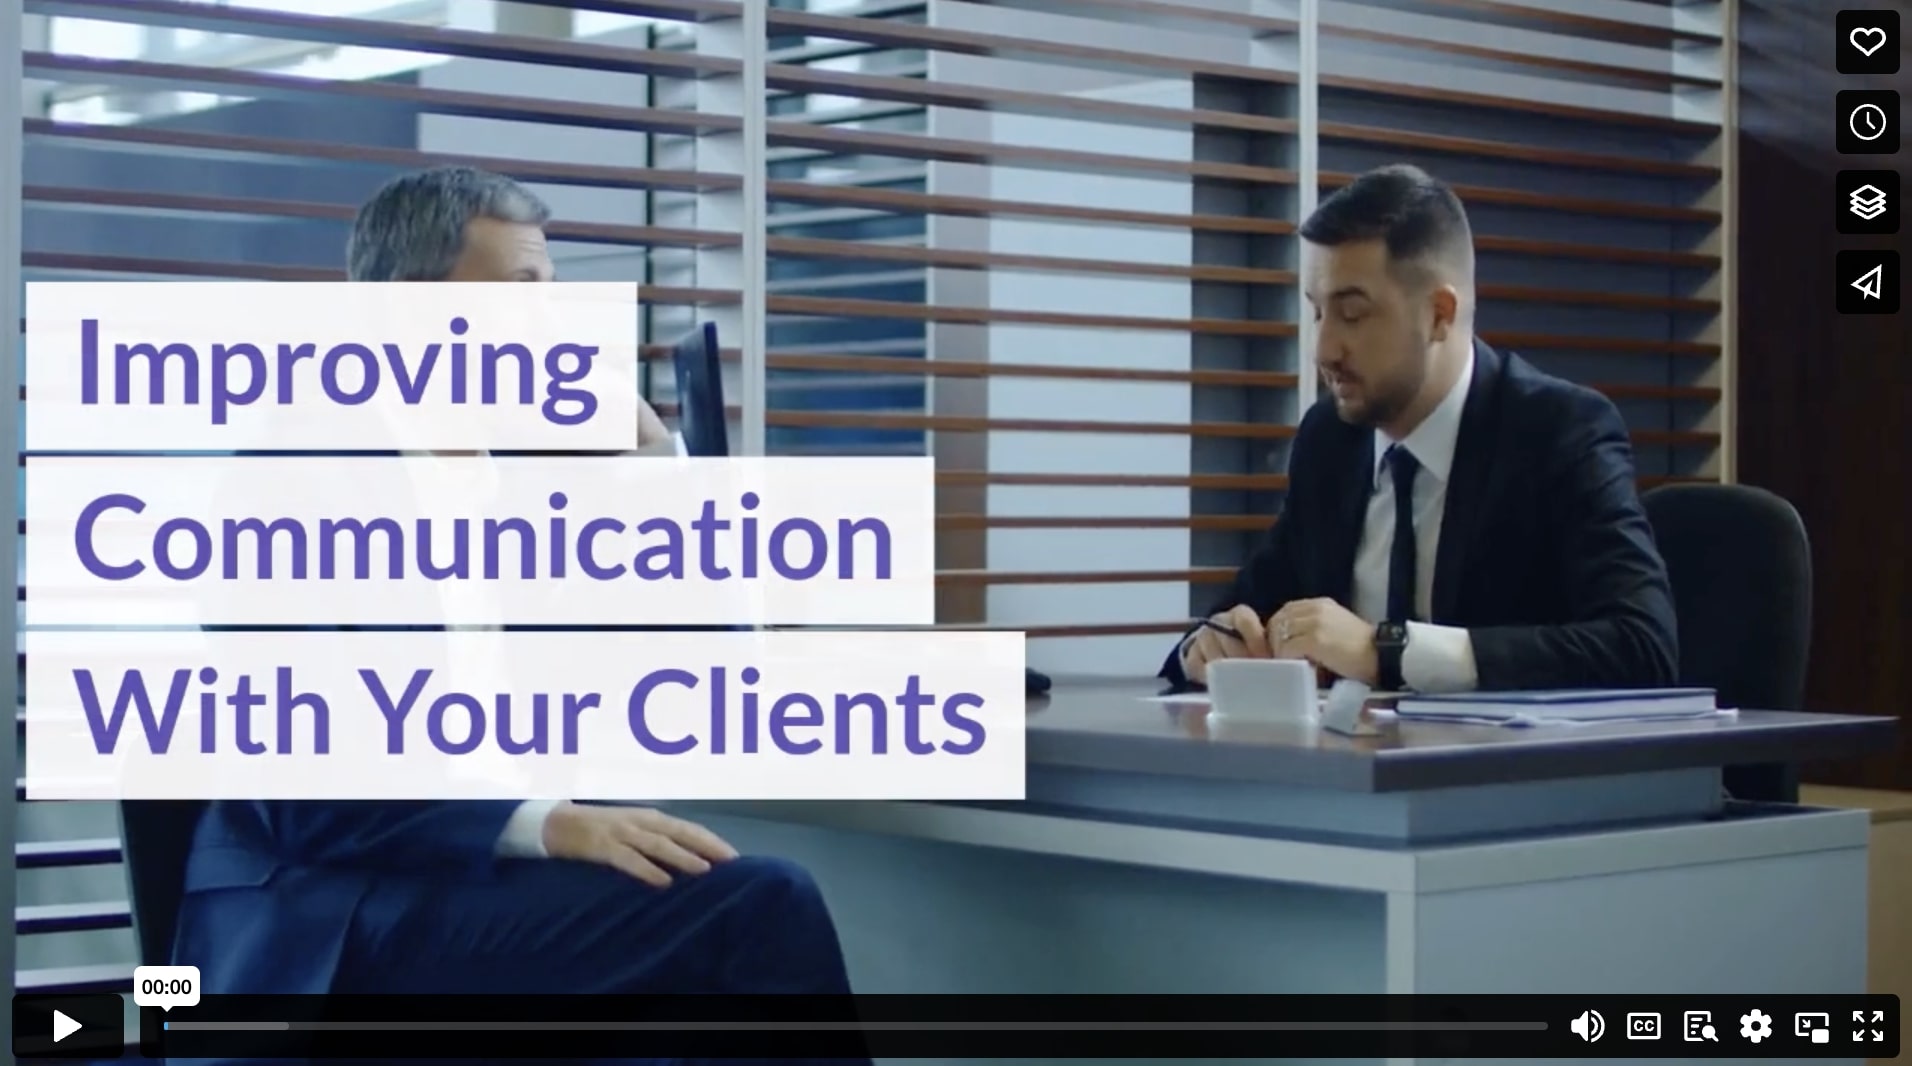 Improving Communication With Your Clients